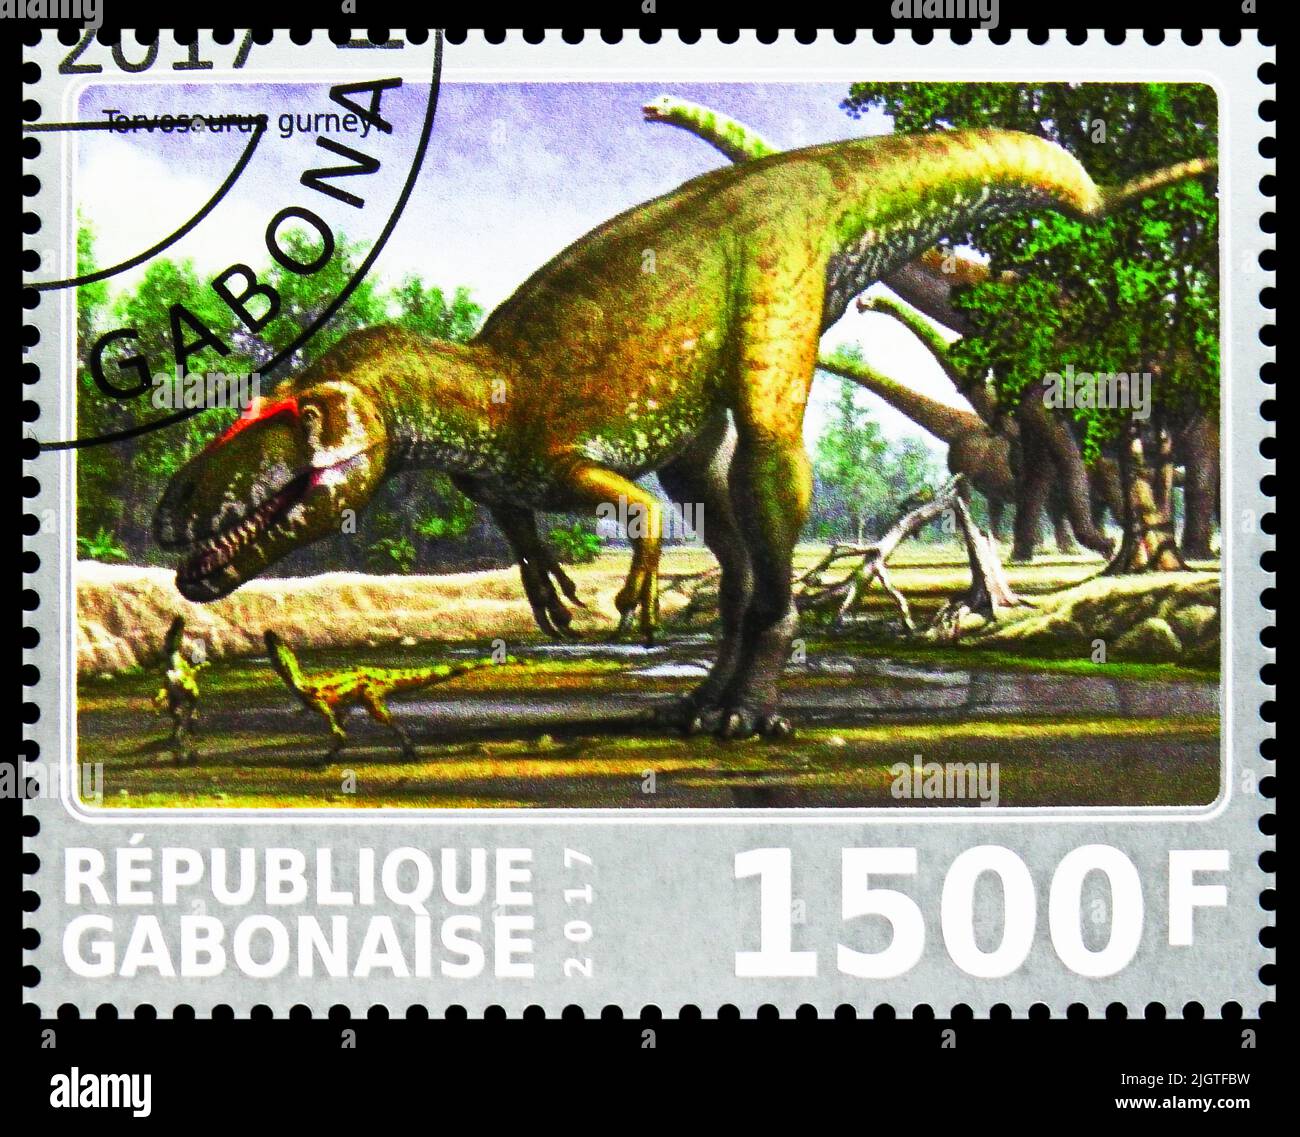 MOSCOW, RUSSIA - JUNE 17, 2022: Postage stamp printed in Gabon shows Torvosaurus tanneri, Dinosaurs serie, circa 2017 Stock Photo